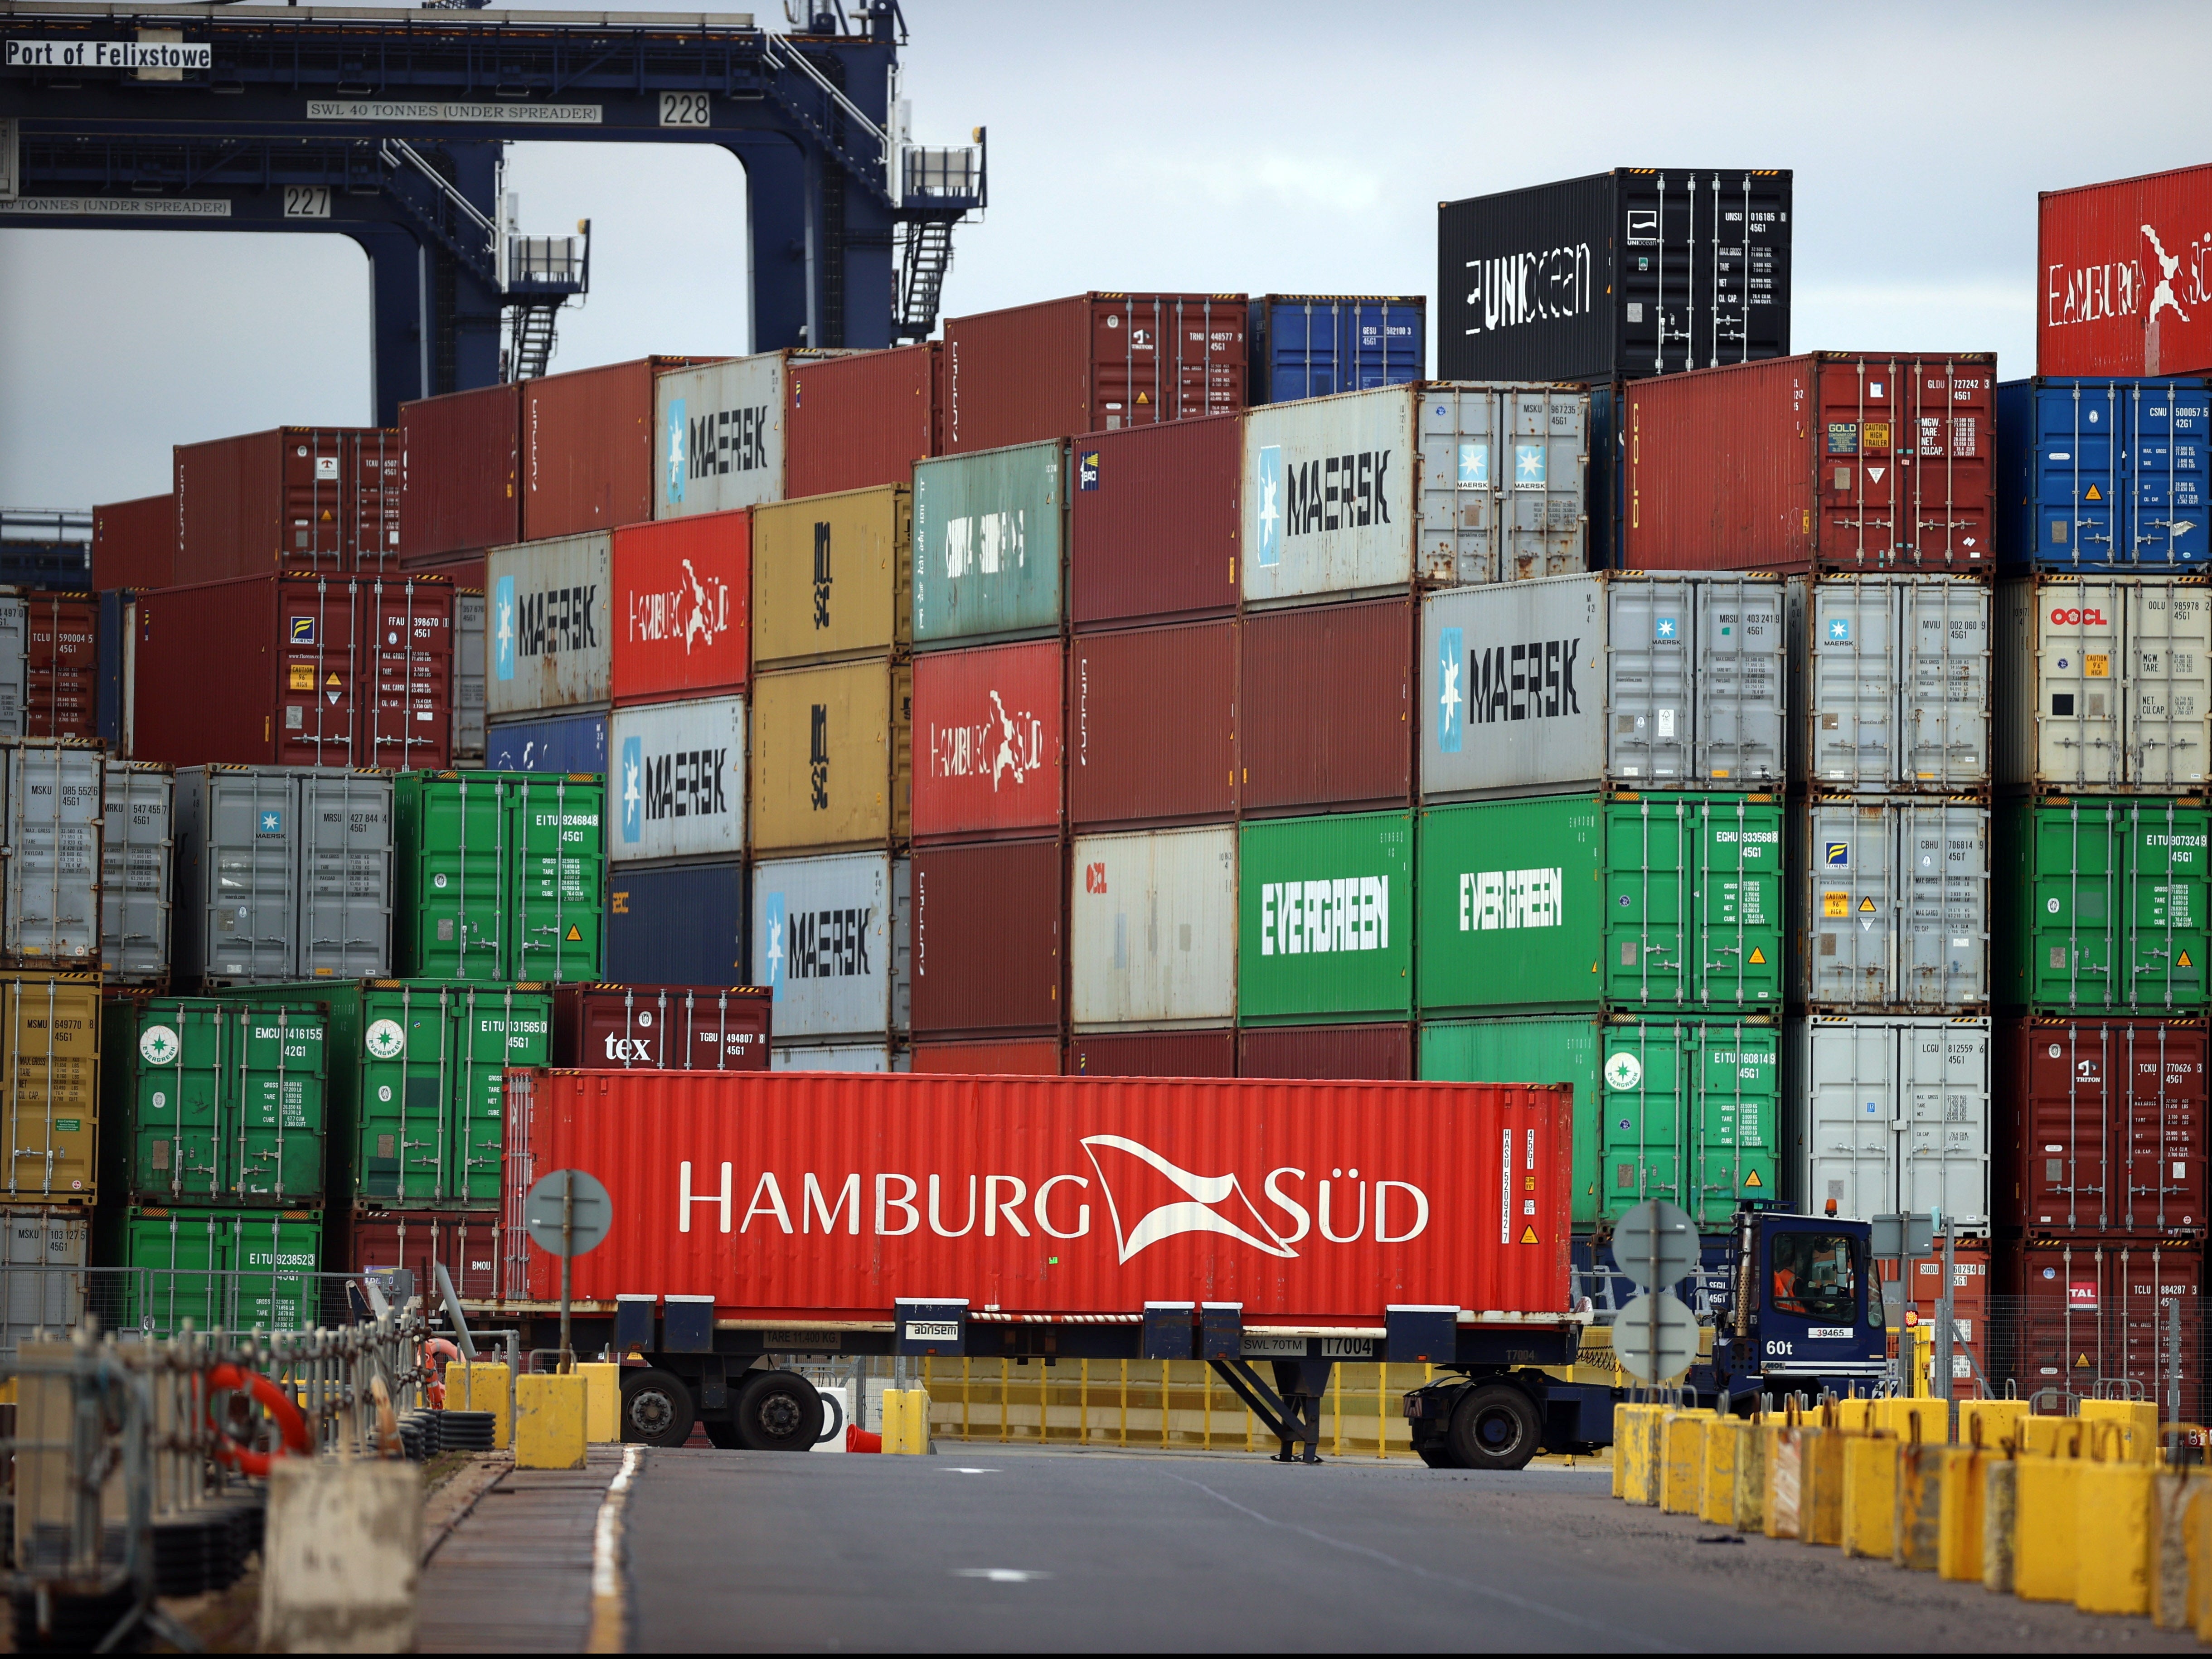 Felixstowe port has suffered from backlogs